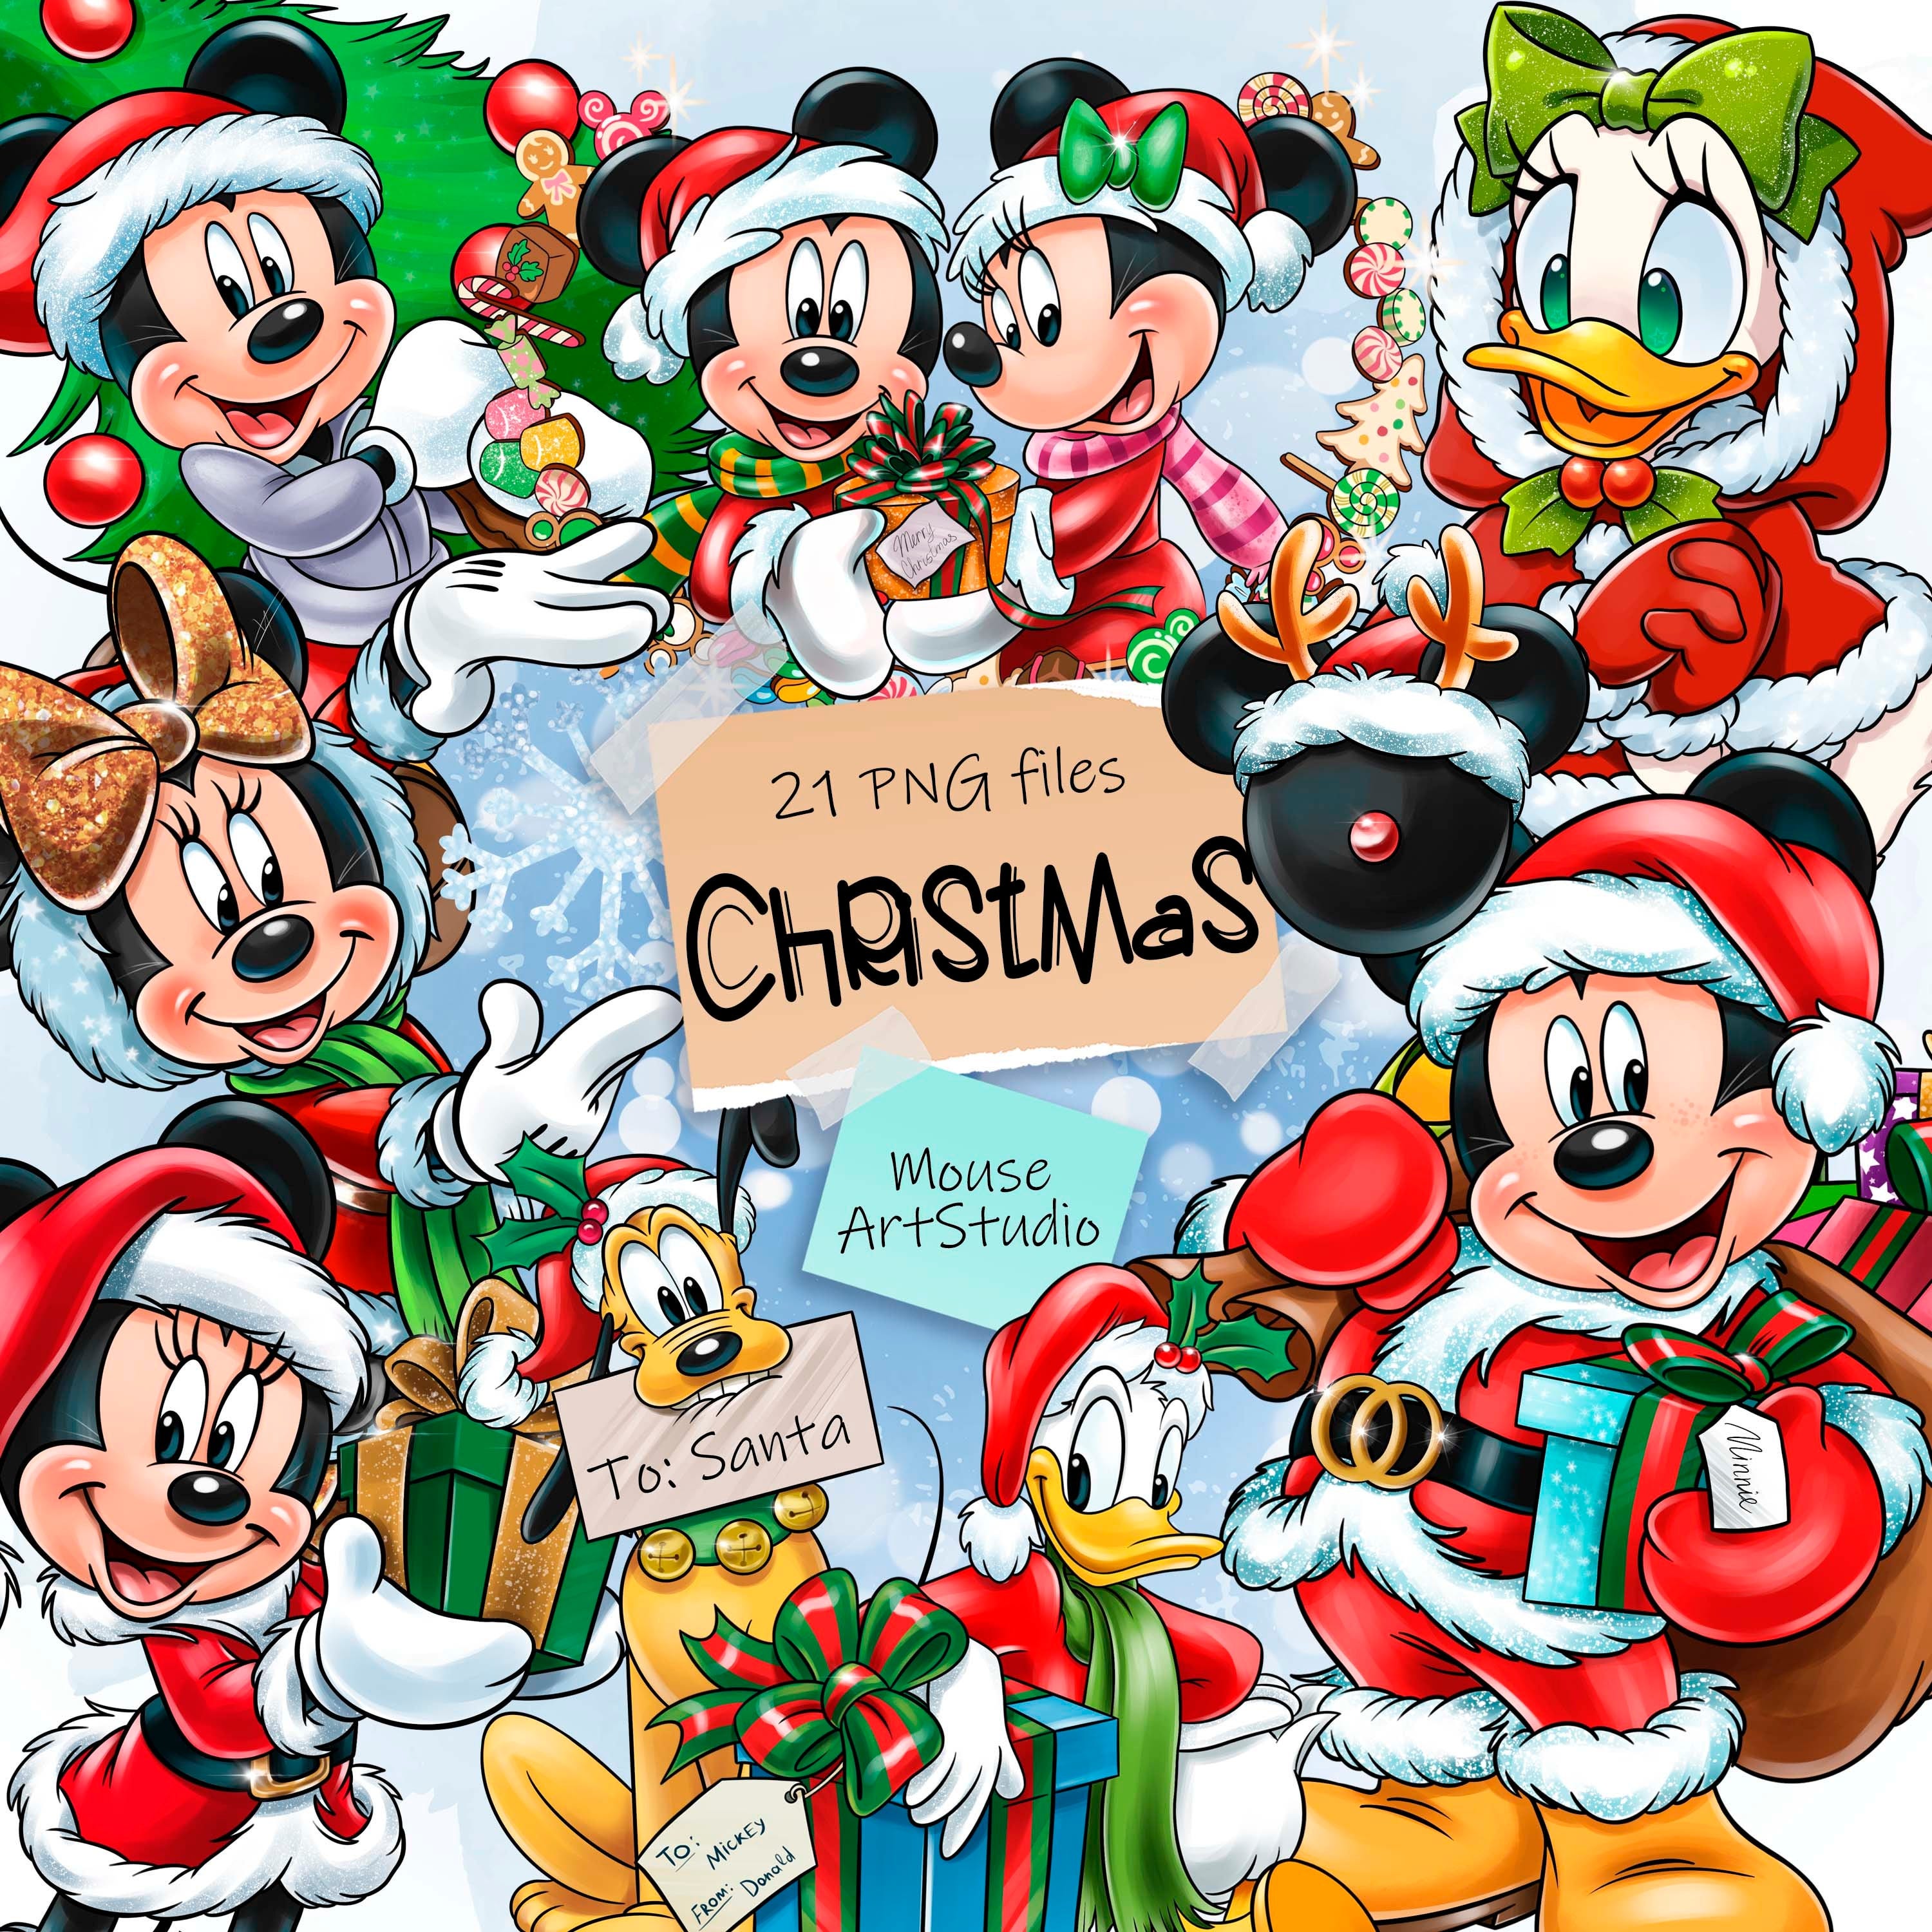 Mickey and Minnie Mouse, Donald And Daisy, Pluto, Merry Christmas, Sublimation Design, Digital Illustration, Instant Download